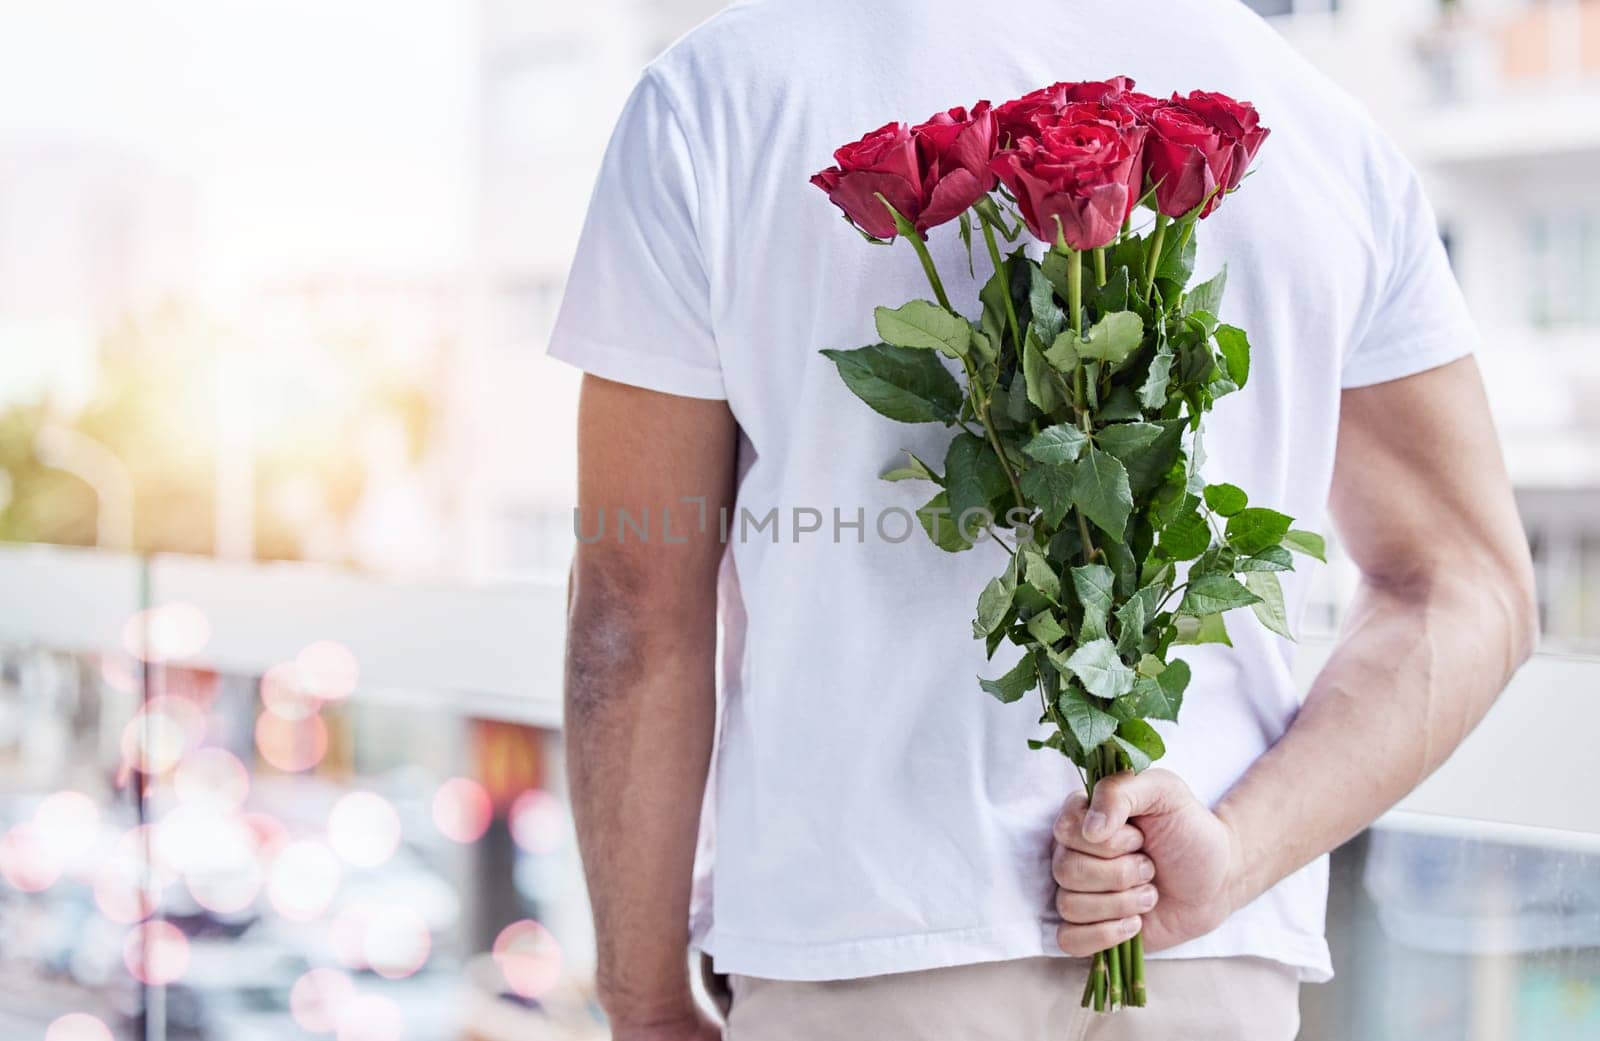 Love, surprise and man with roses behind back for date, romance and hope for valentines day. Romantic confession, floral gift and person with bouquet of flowers in city for proposal or engagement